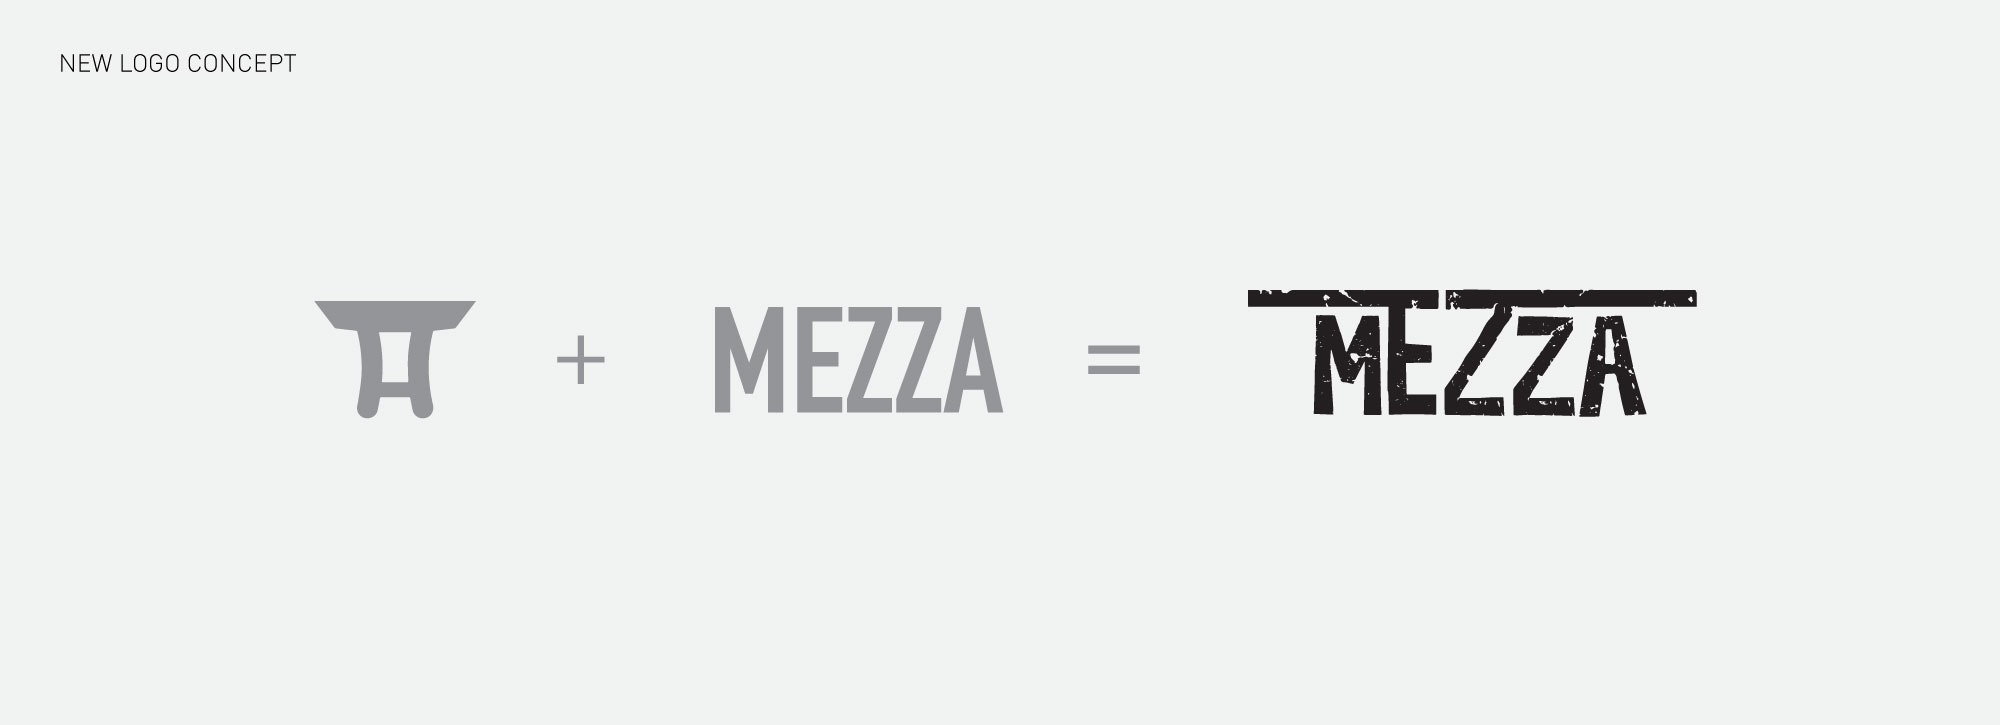 mezza logo design 3 logo inspiration showing table and text joining to create the final logo